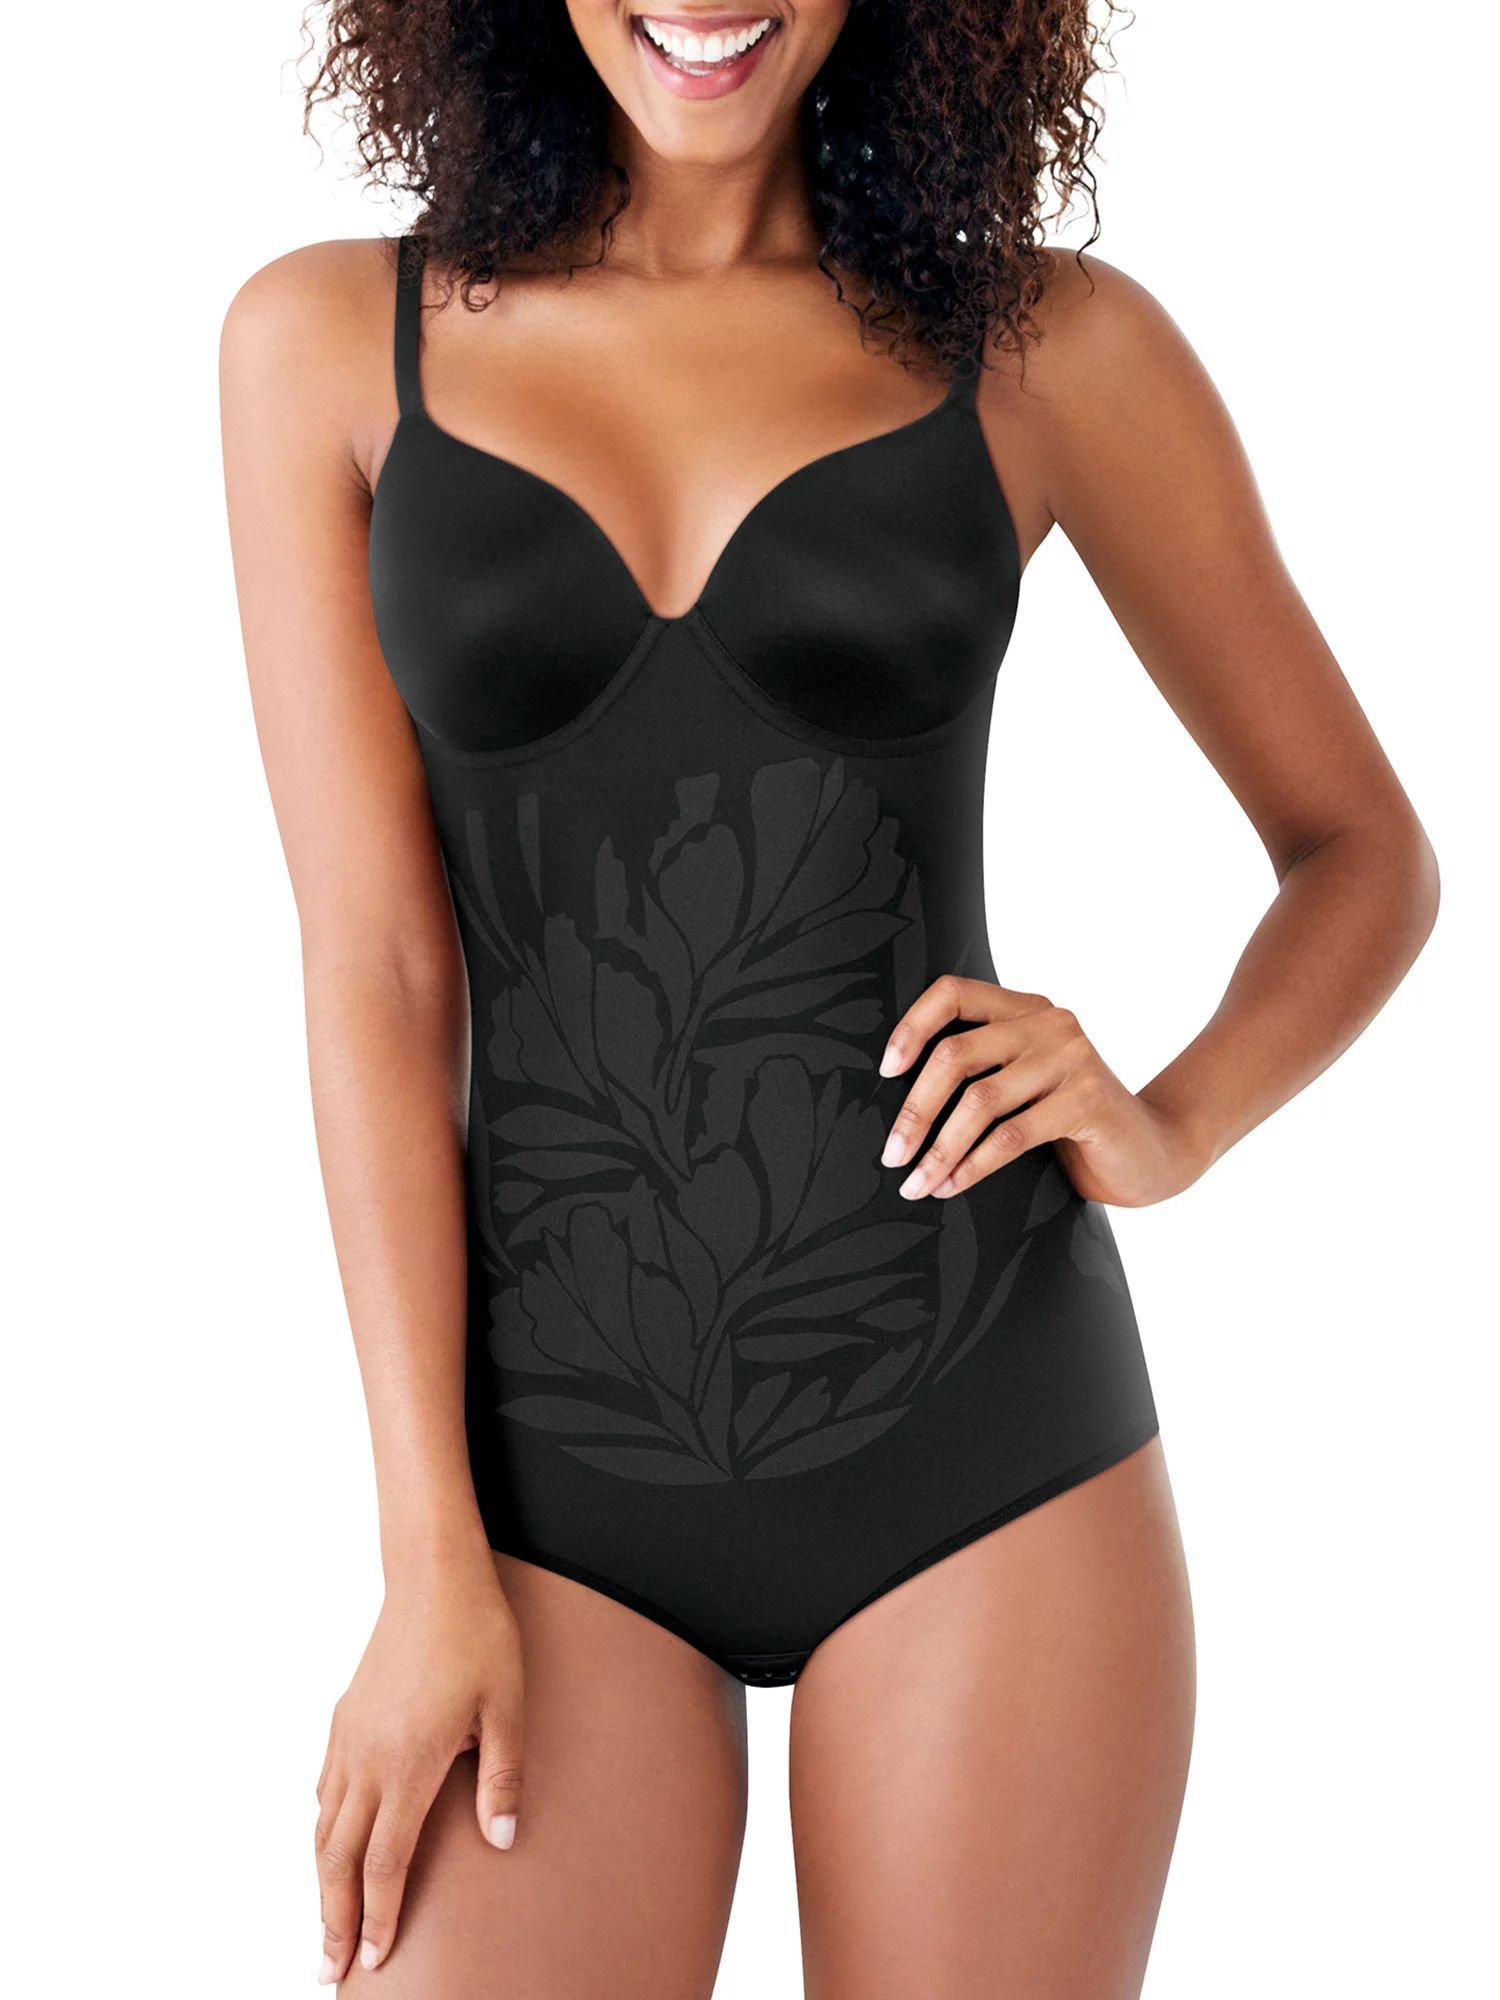 Maidenform Flexees Women's Fit Sense All-In-One Shaping Bodybriefer Style FLS075 | Walmart (US)